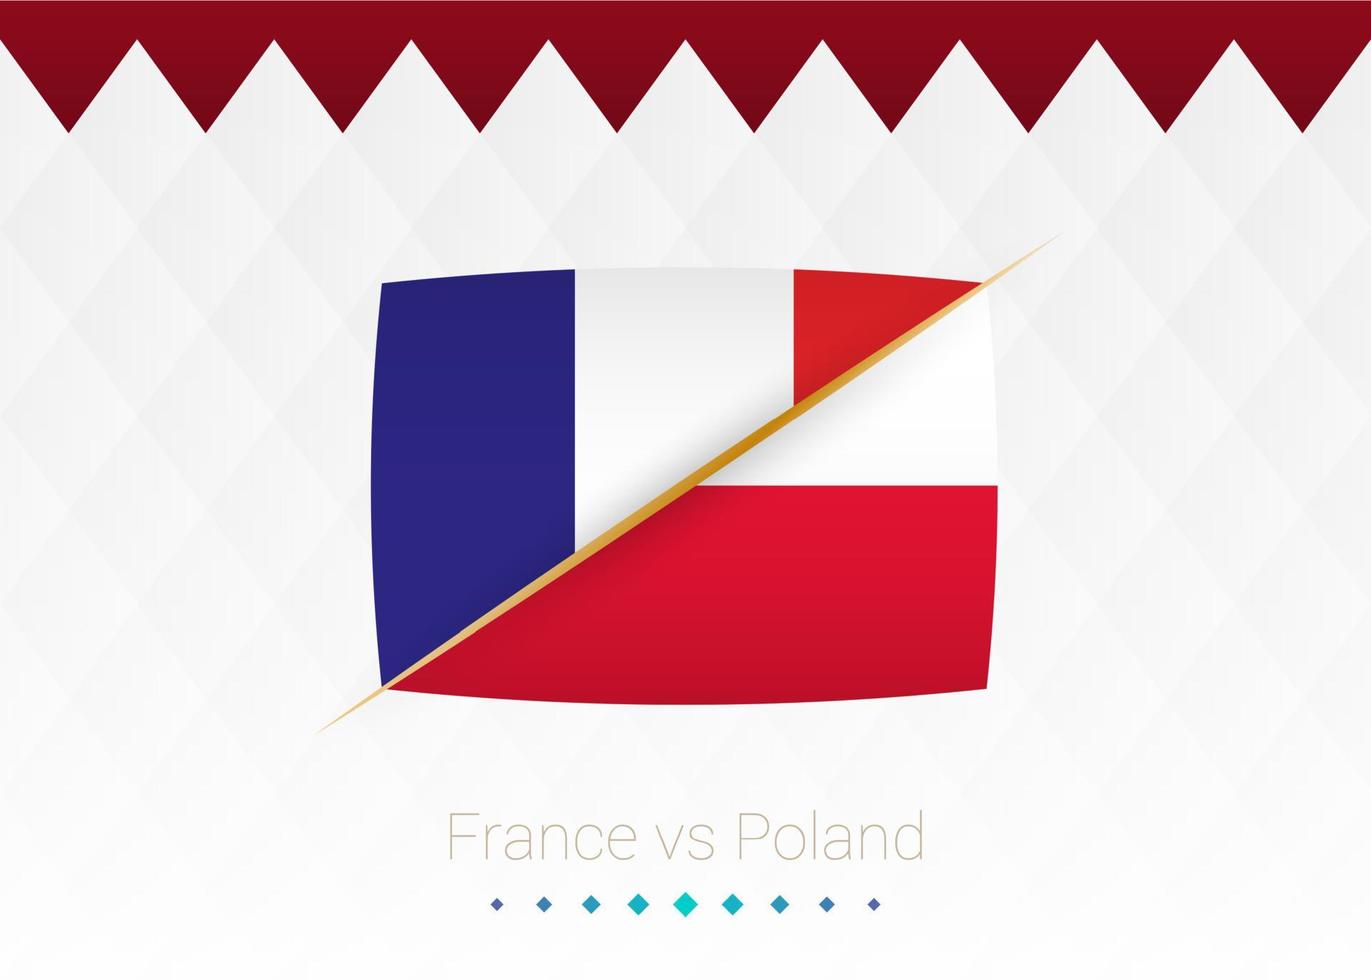 National football team France vs Poland, Round of 16. Soccer 2022 match versus icon. vector